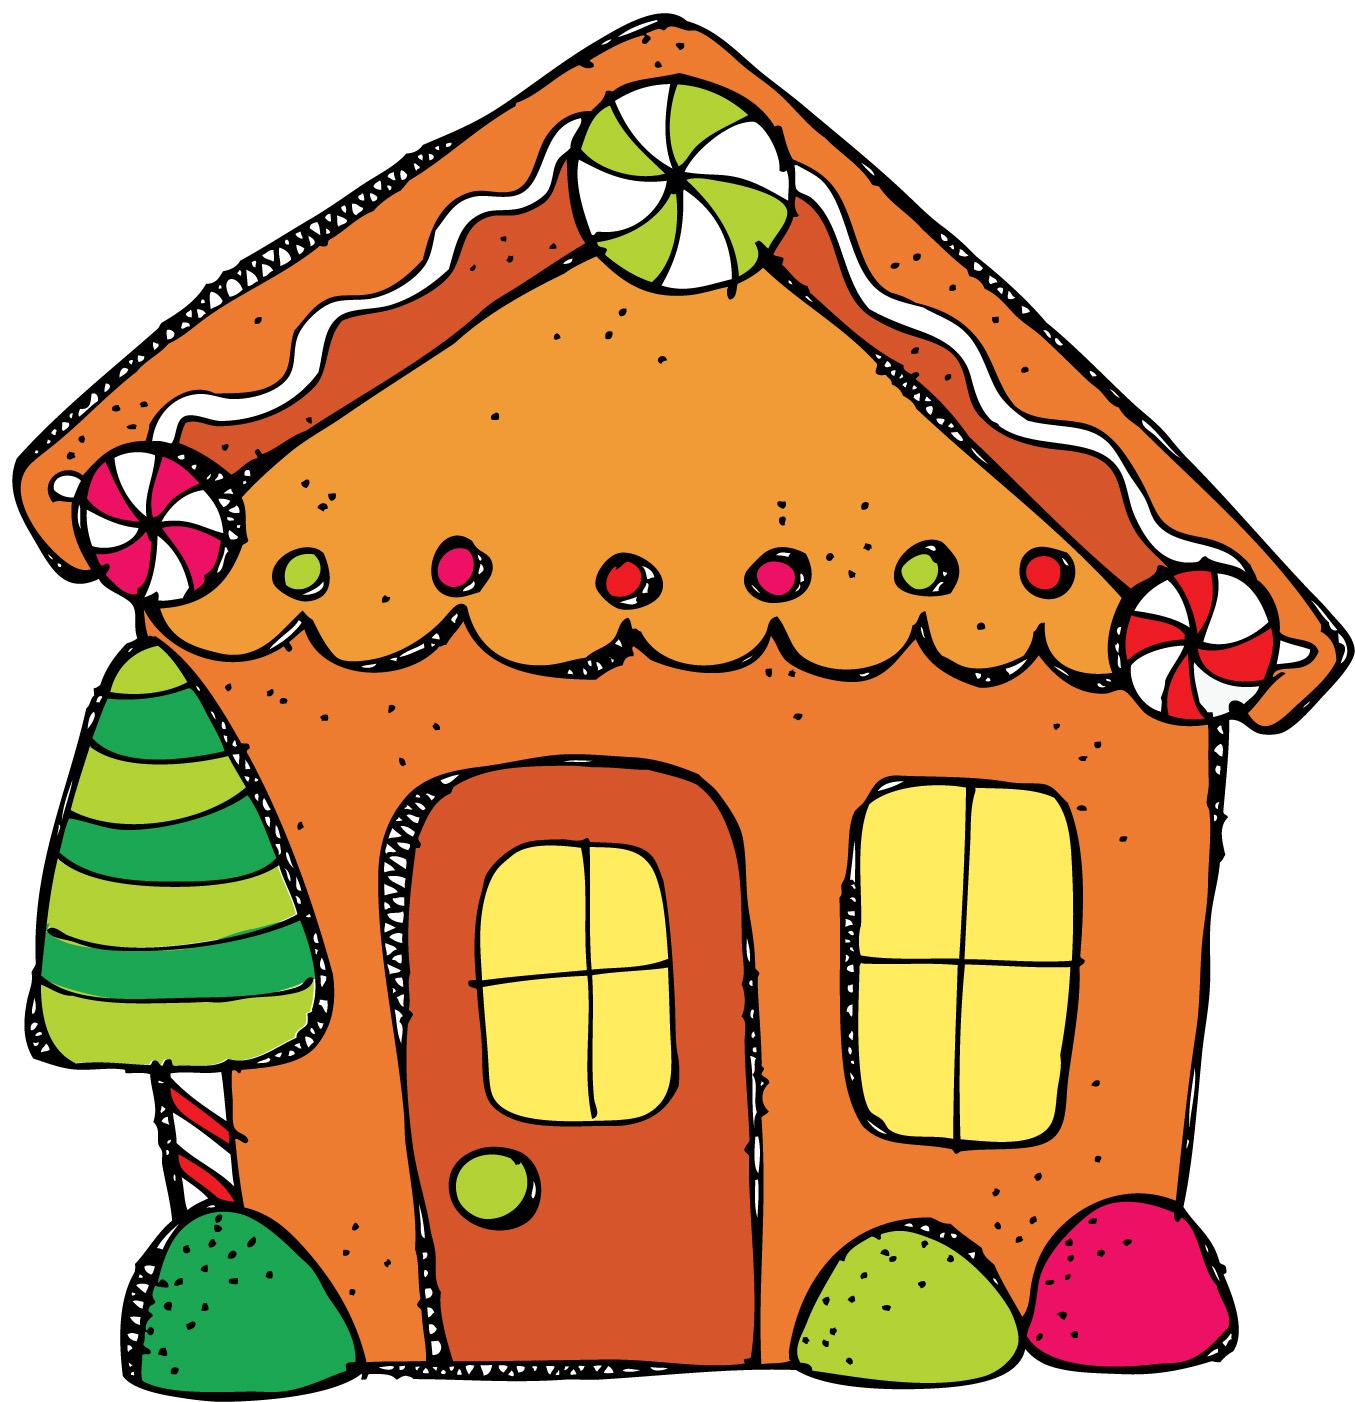 8 gingerbread house clip art free clipart images